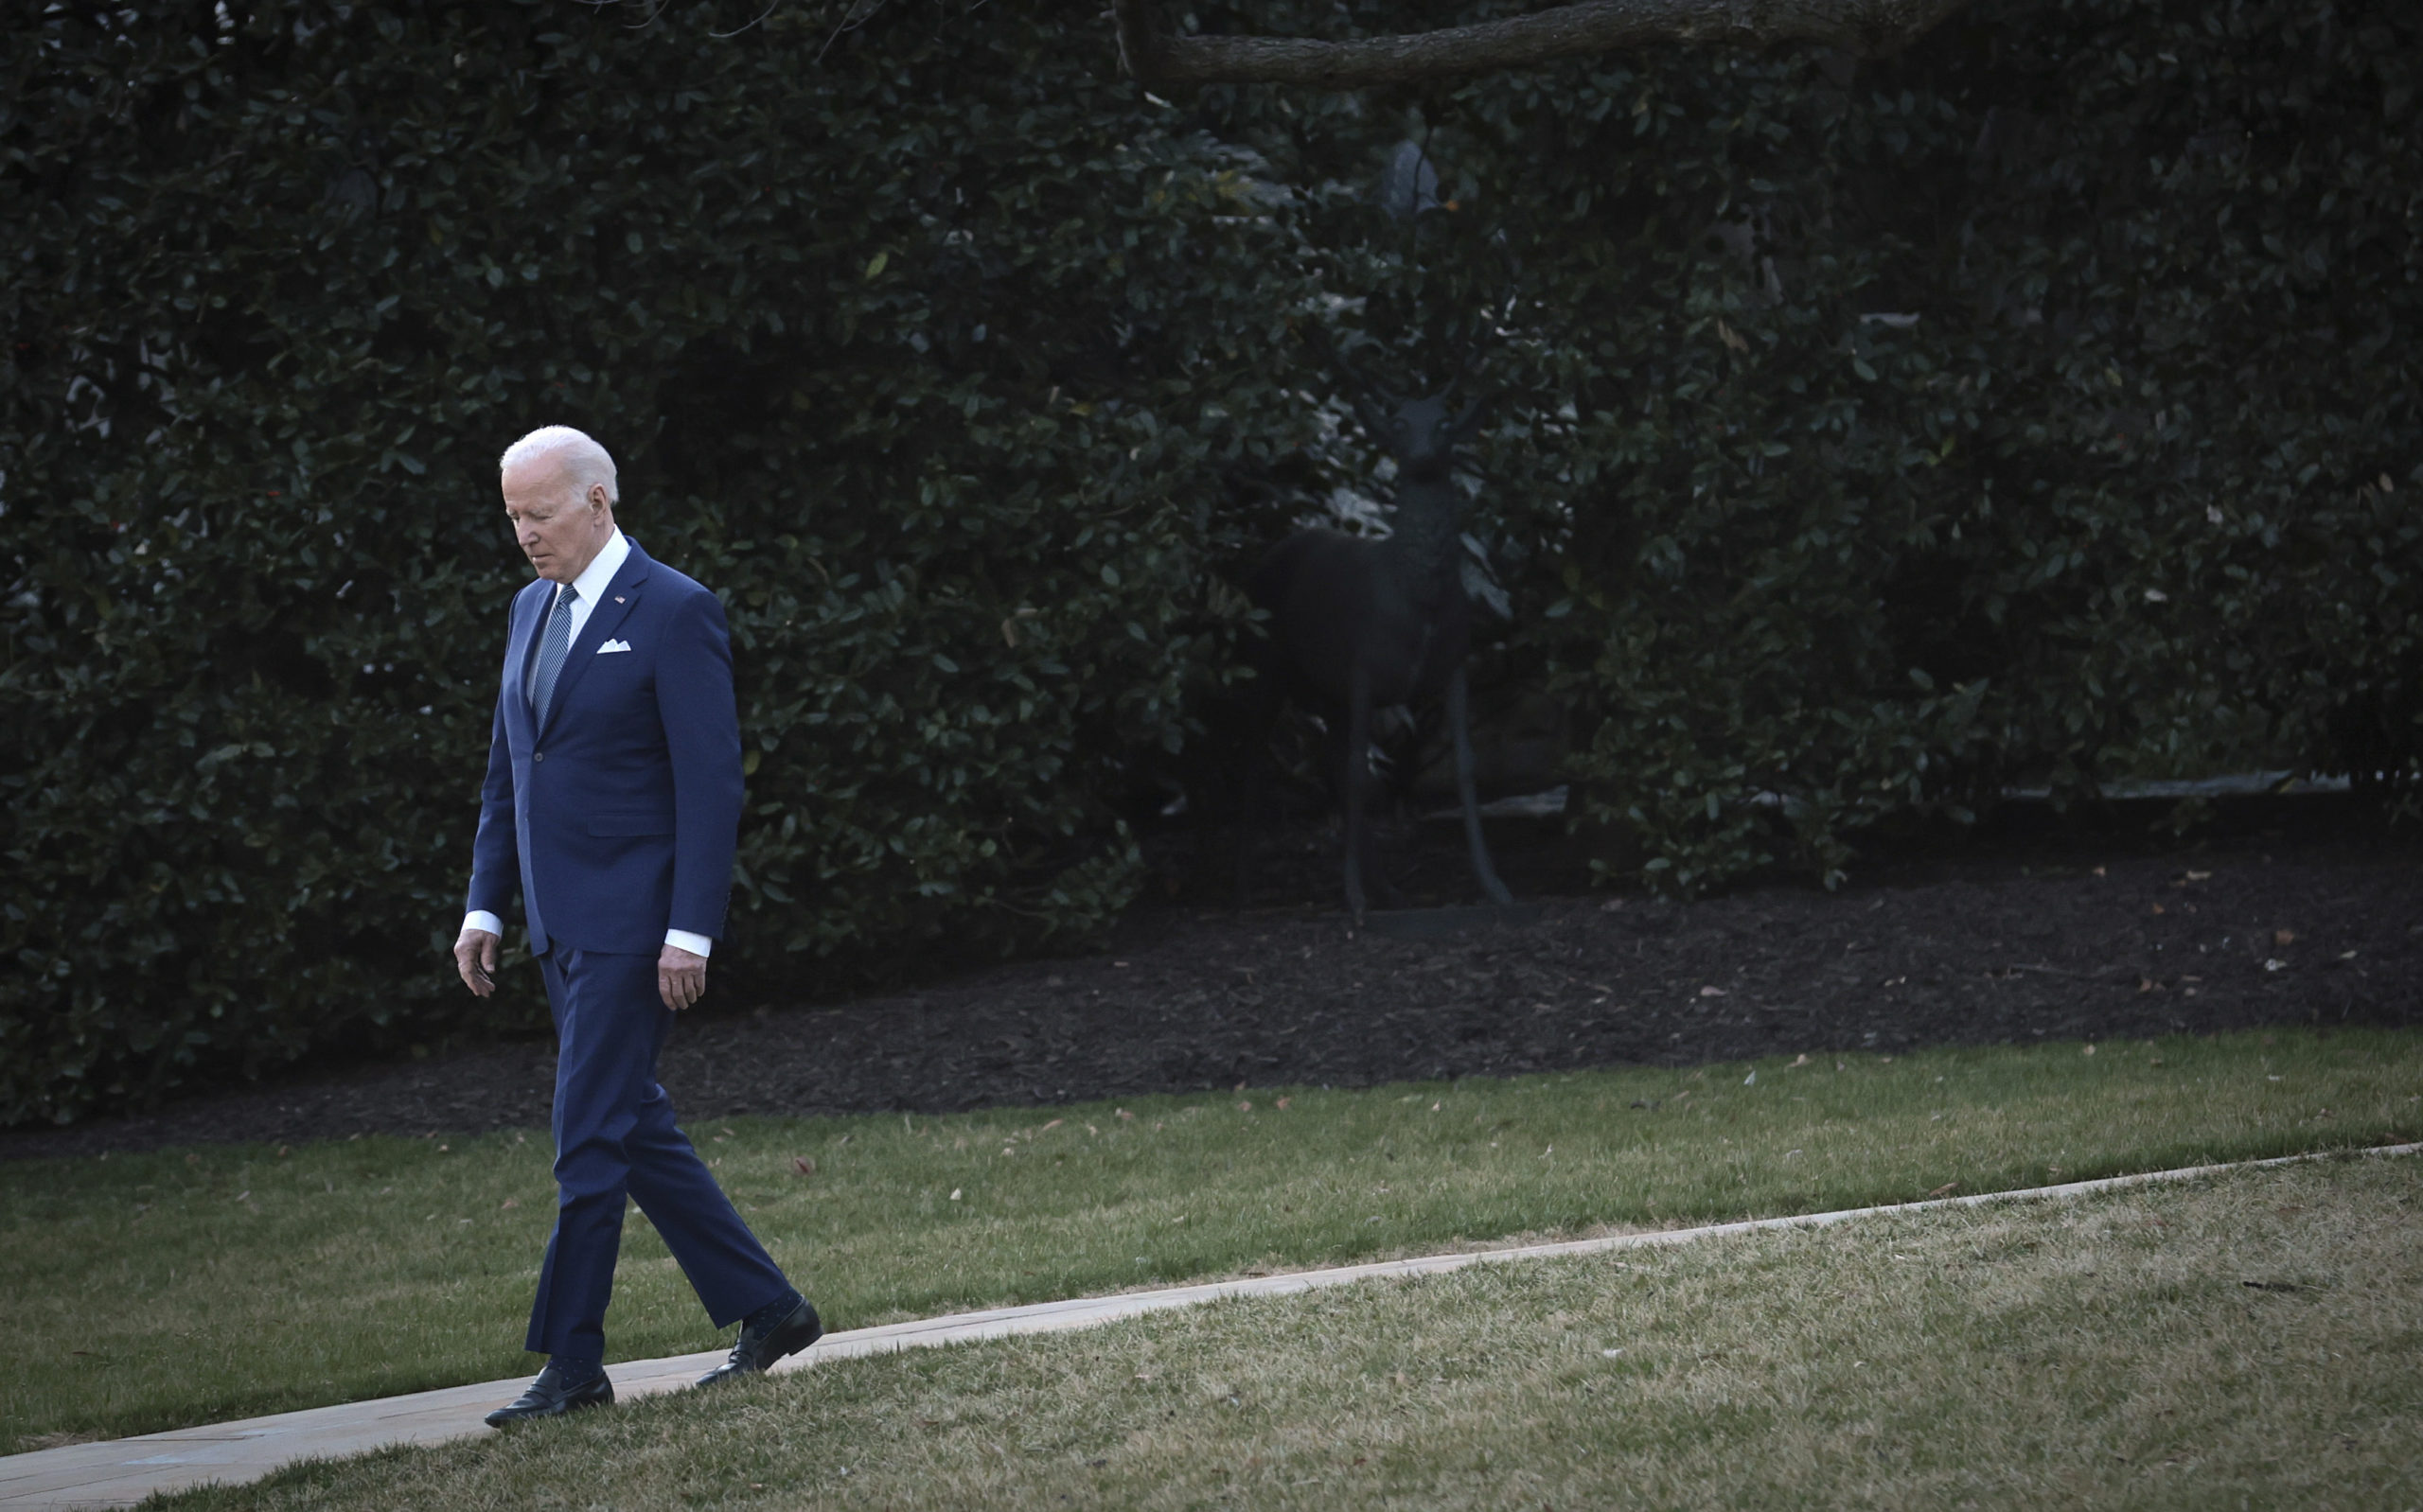 President Joe Biden departs the White House on Friday. He is expected to soon make an announcement banning Russian oil imports. (Win McNamee/Getty Images)